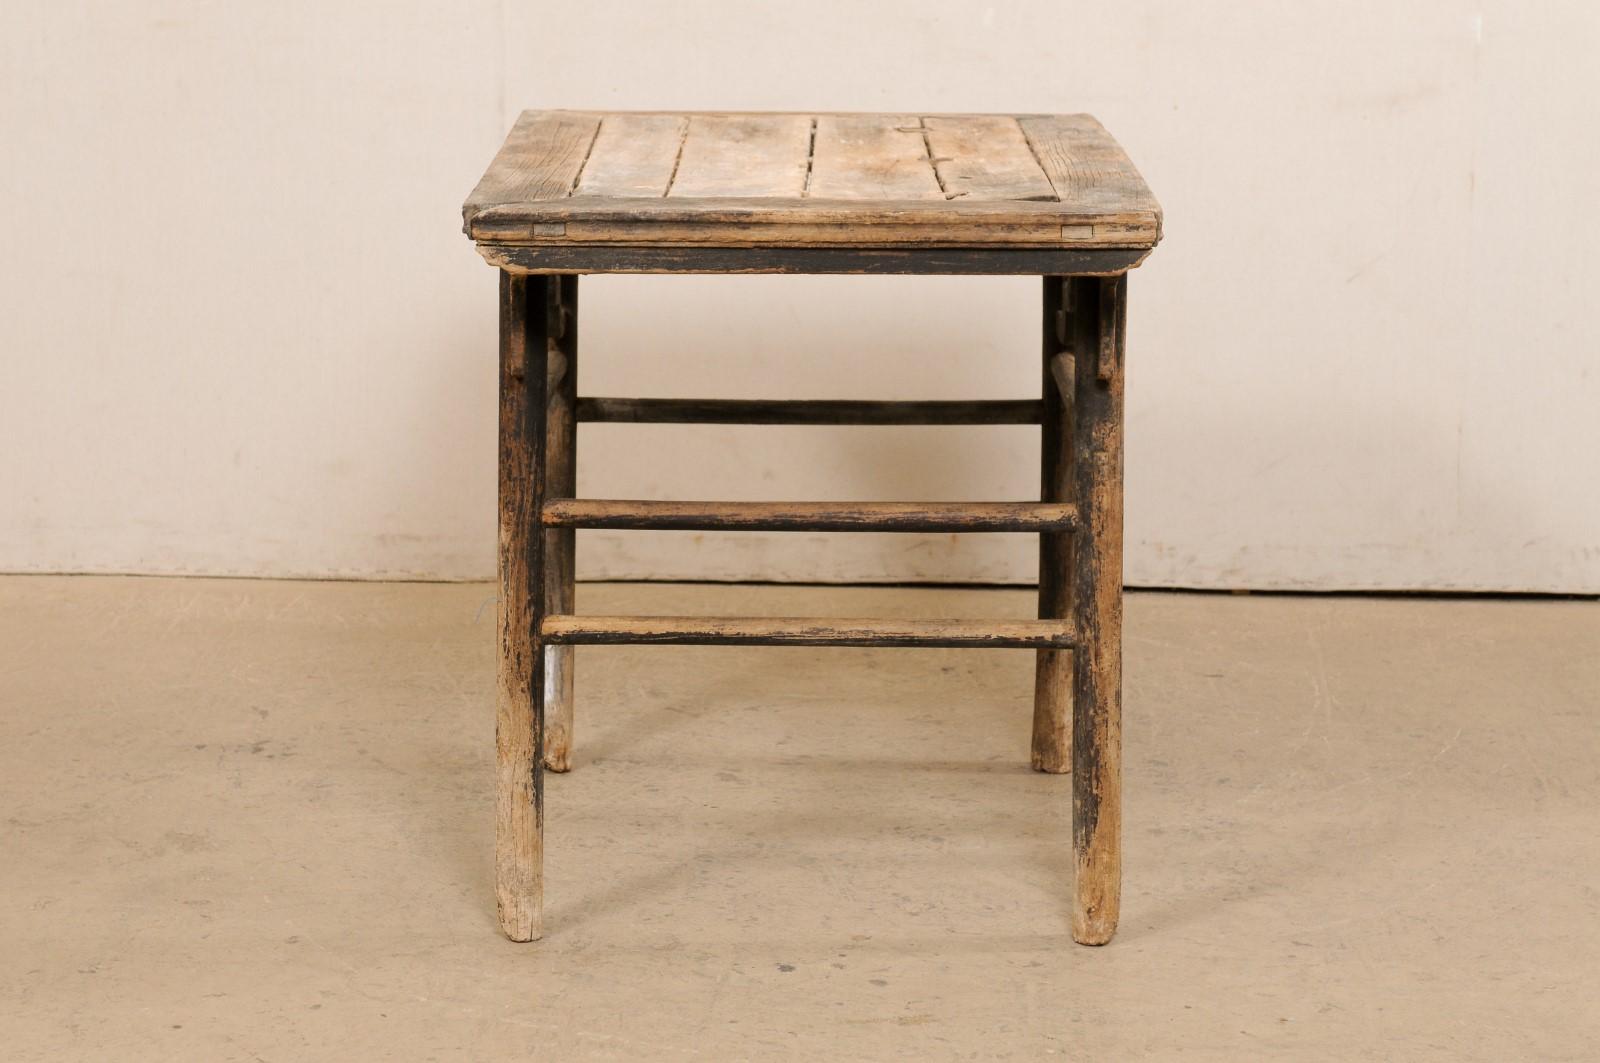 19th C. Chinese Occasional Table w/its Original Finish & Old Joinery Repairs For Sale 4